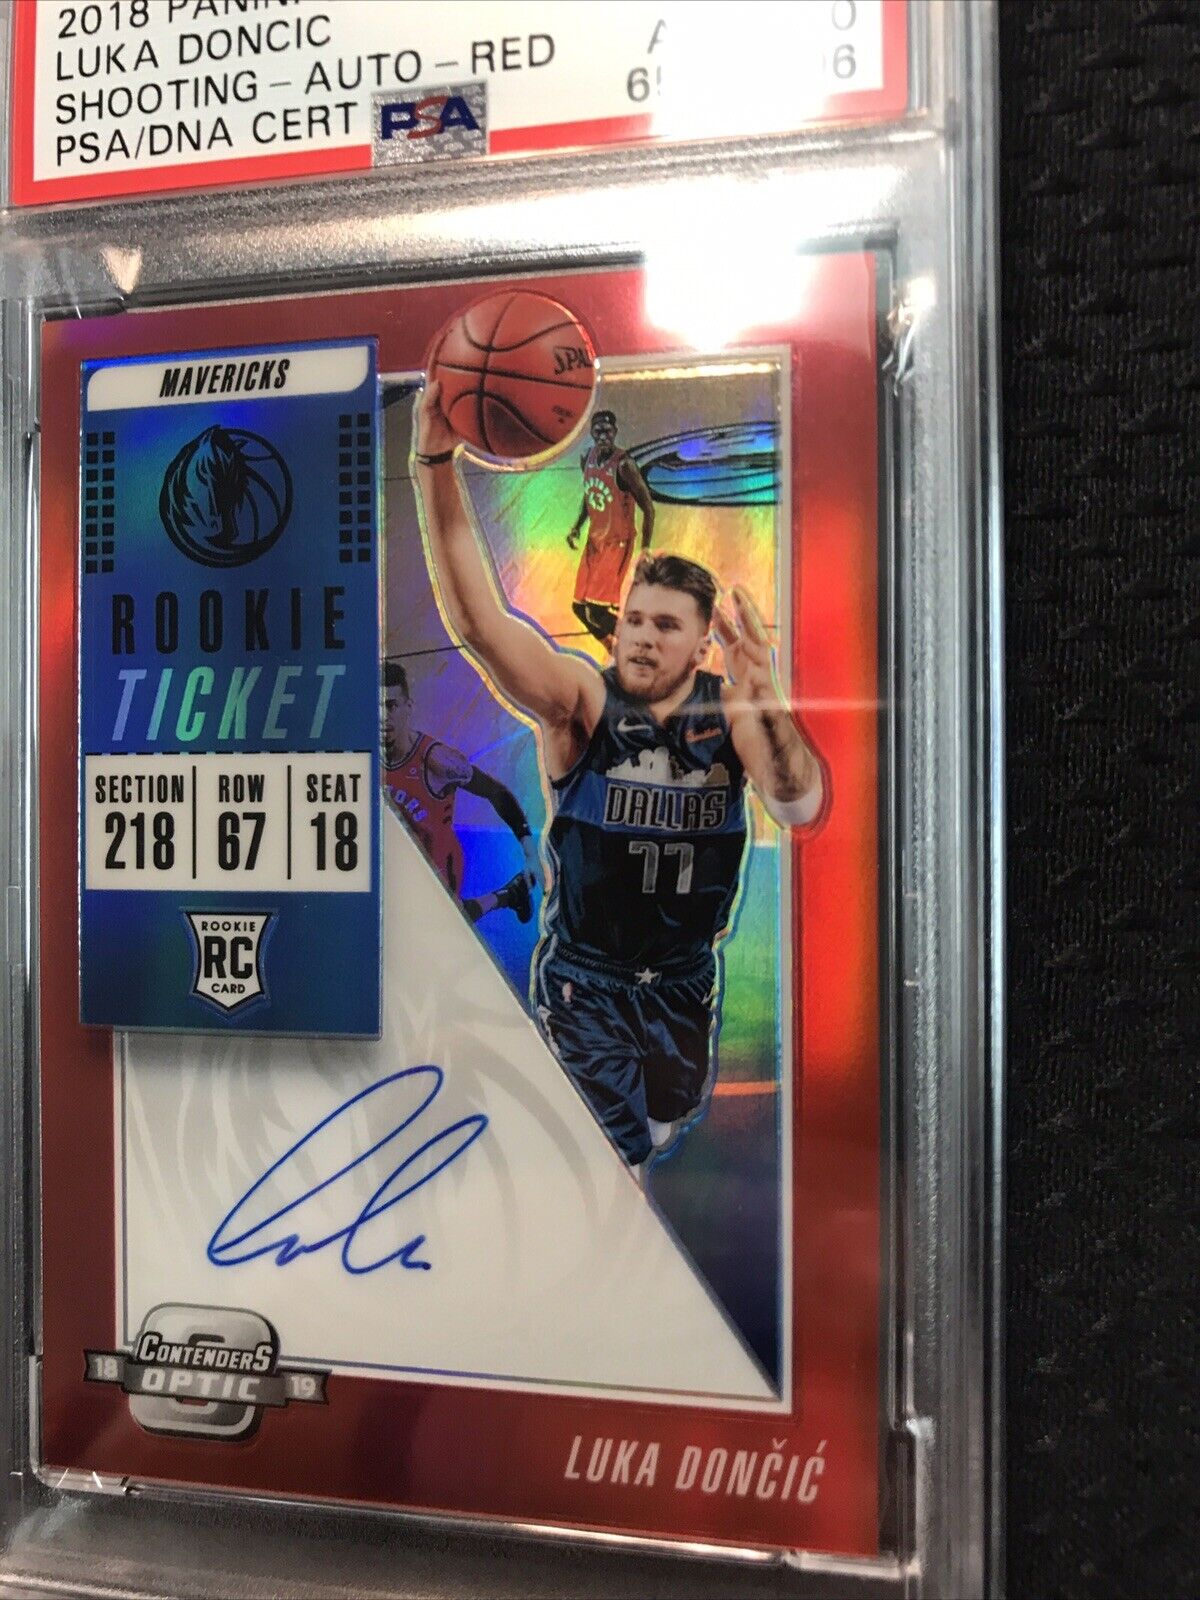 2018-19 Contenders Optic Red LUKA DONCIC Rookie Ticket /149 PSA 9